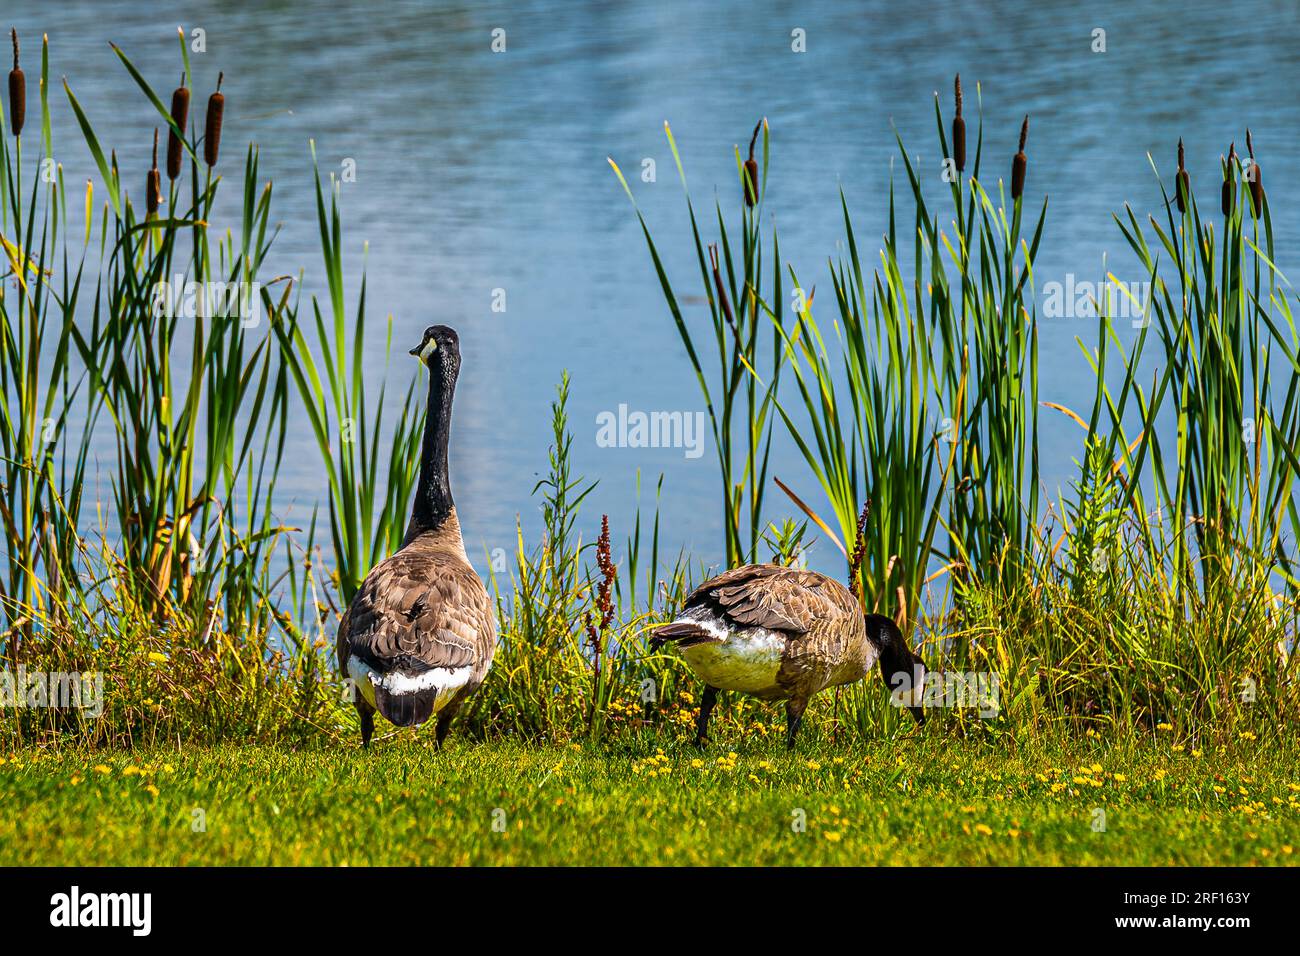 Canadian Goose (Branta canadensis), these geese can be found throughout Canada with a black head and neck, white cheeks, white chin, and brown body. Stock Photo